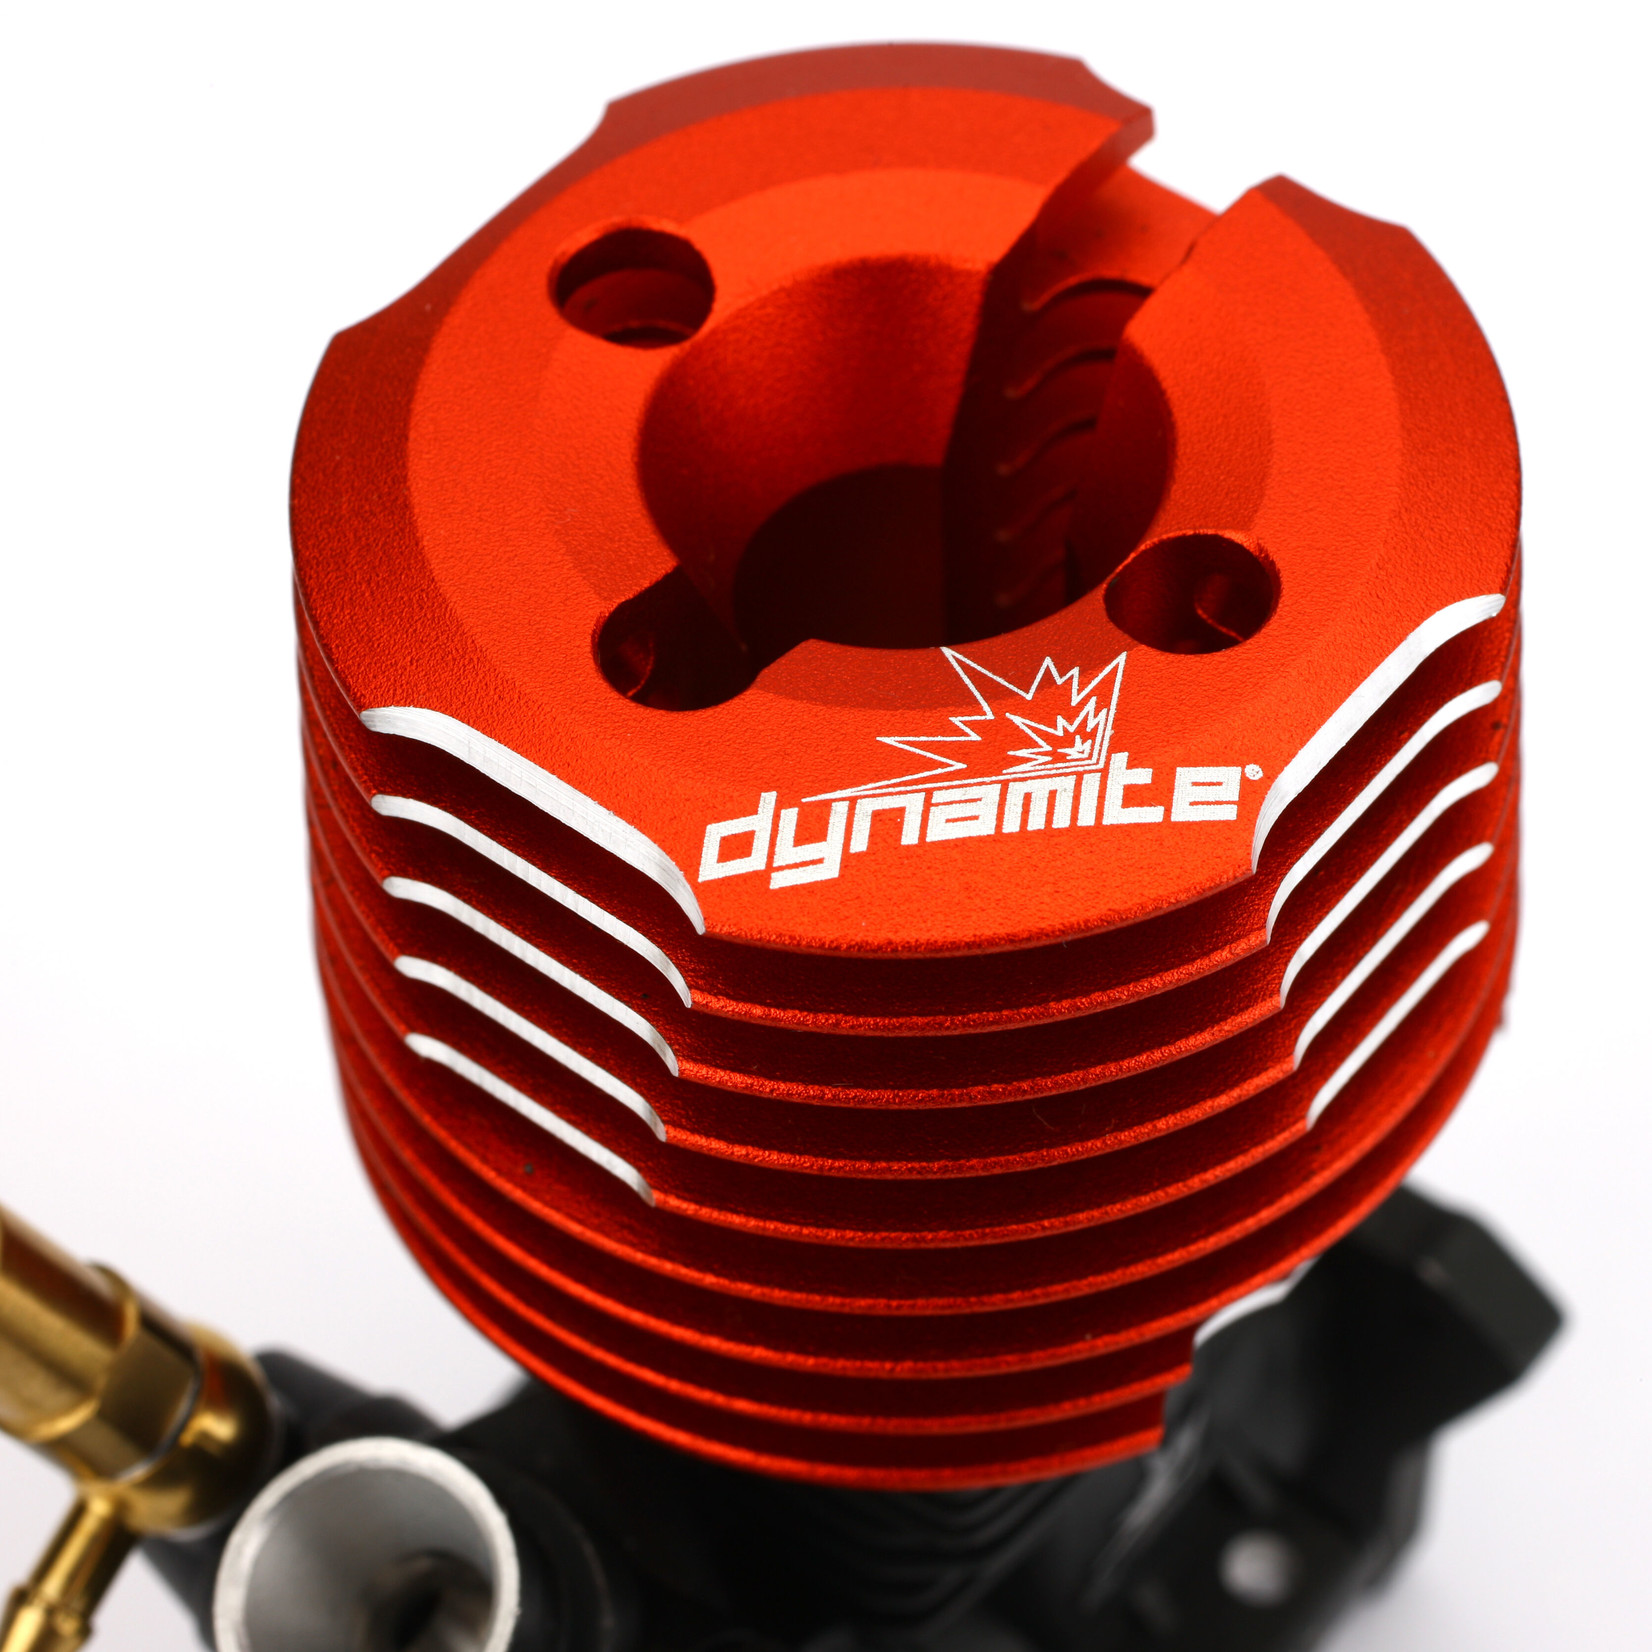 Dynamite RC .19T Mach 2 Replacement Engine for Traxxas Vehicles